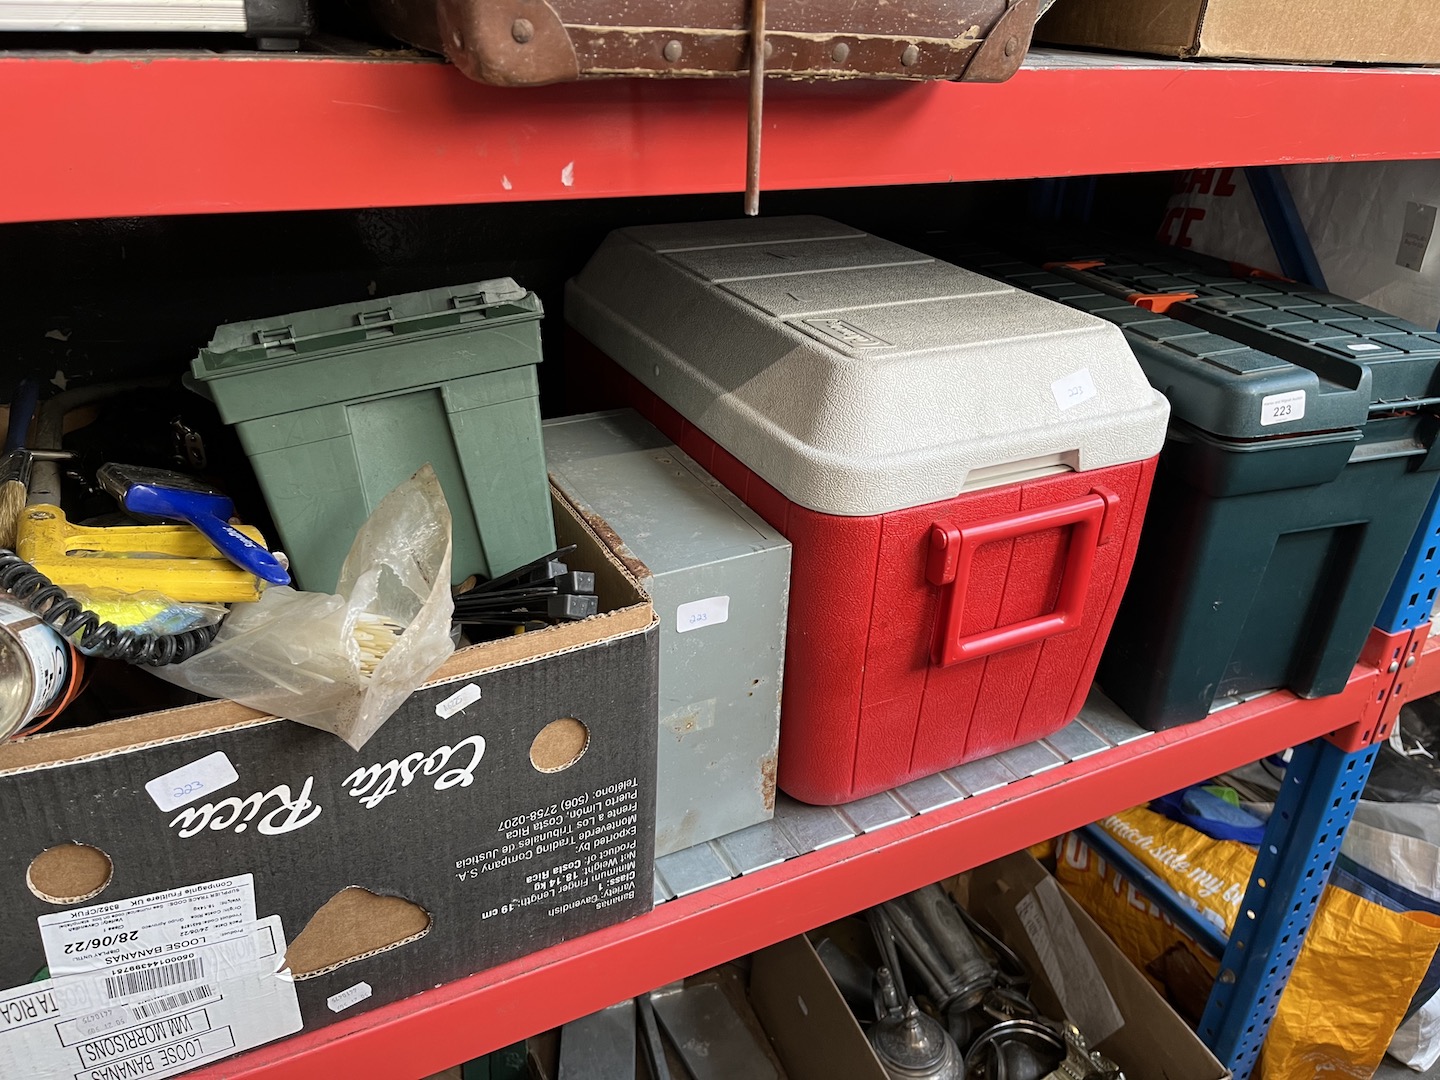 2 toolboxes with tools, a box of tools and an empty tin box.